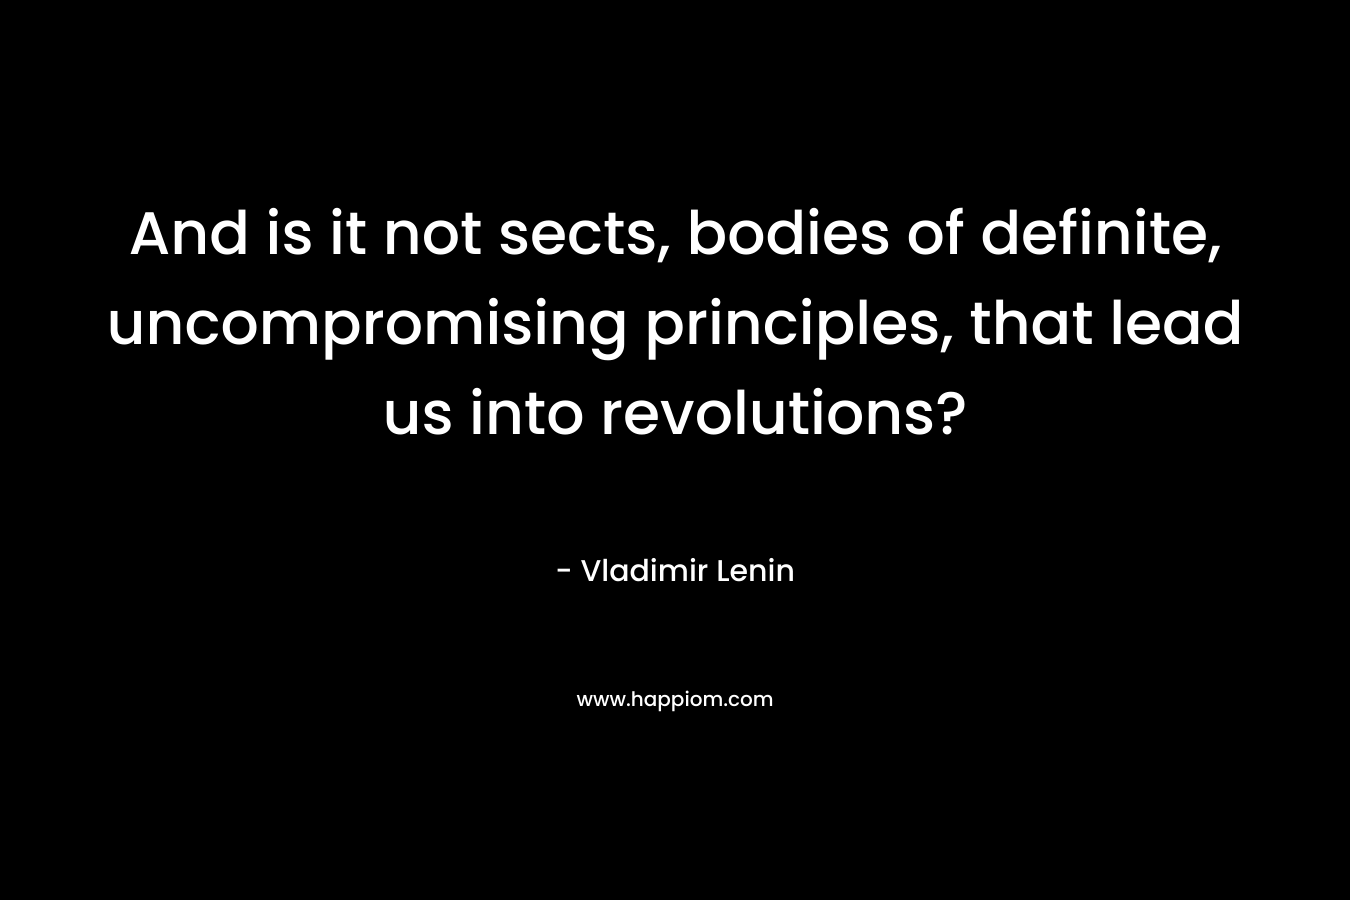 And is it not sects, bodies of definite, uncompromising principles, that lead us into revolutions?